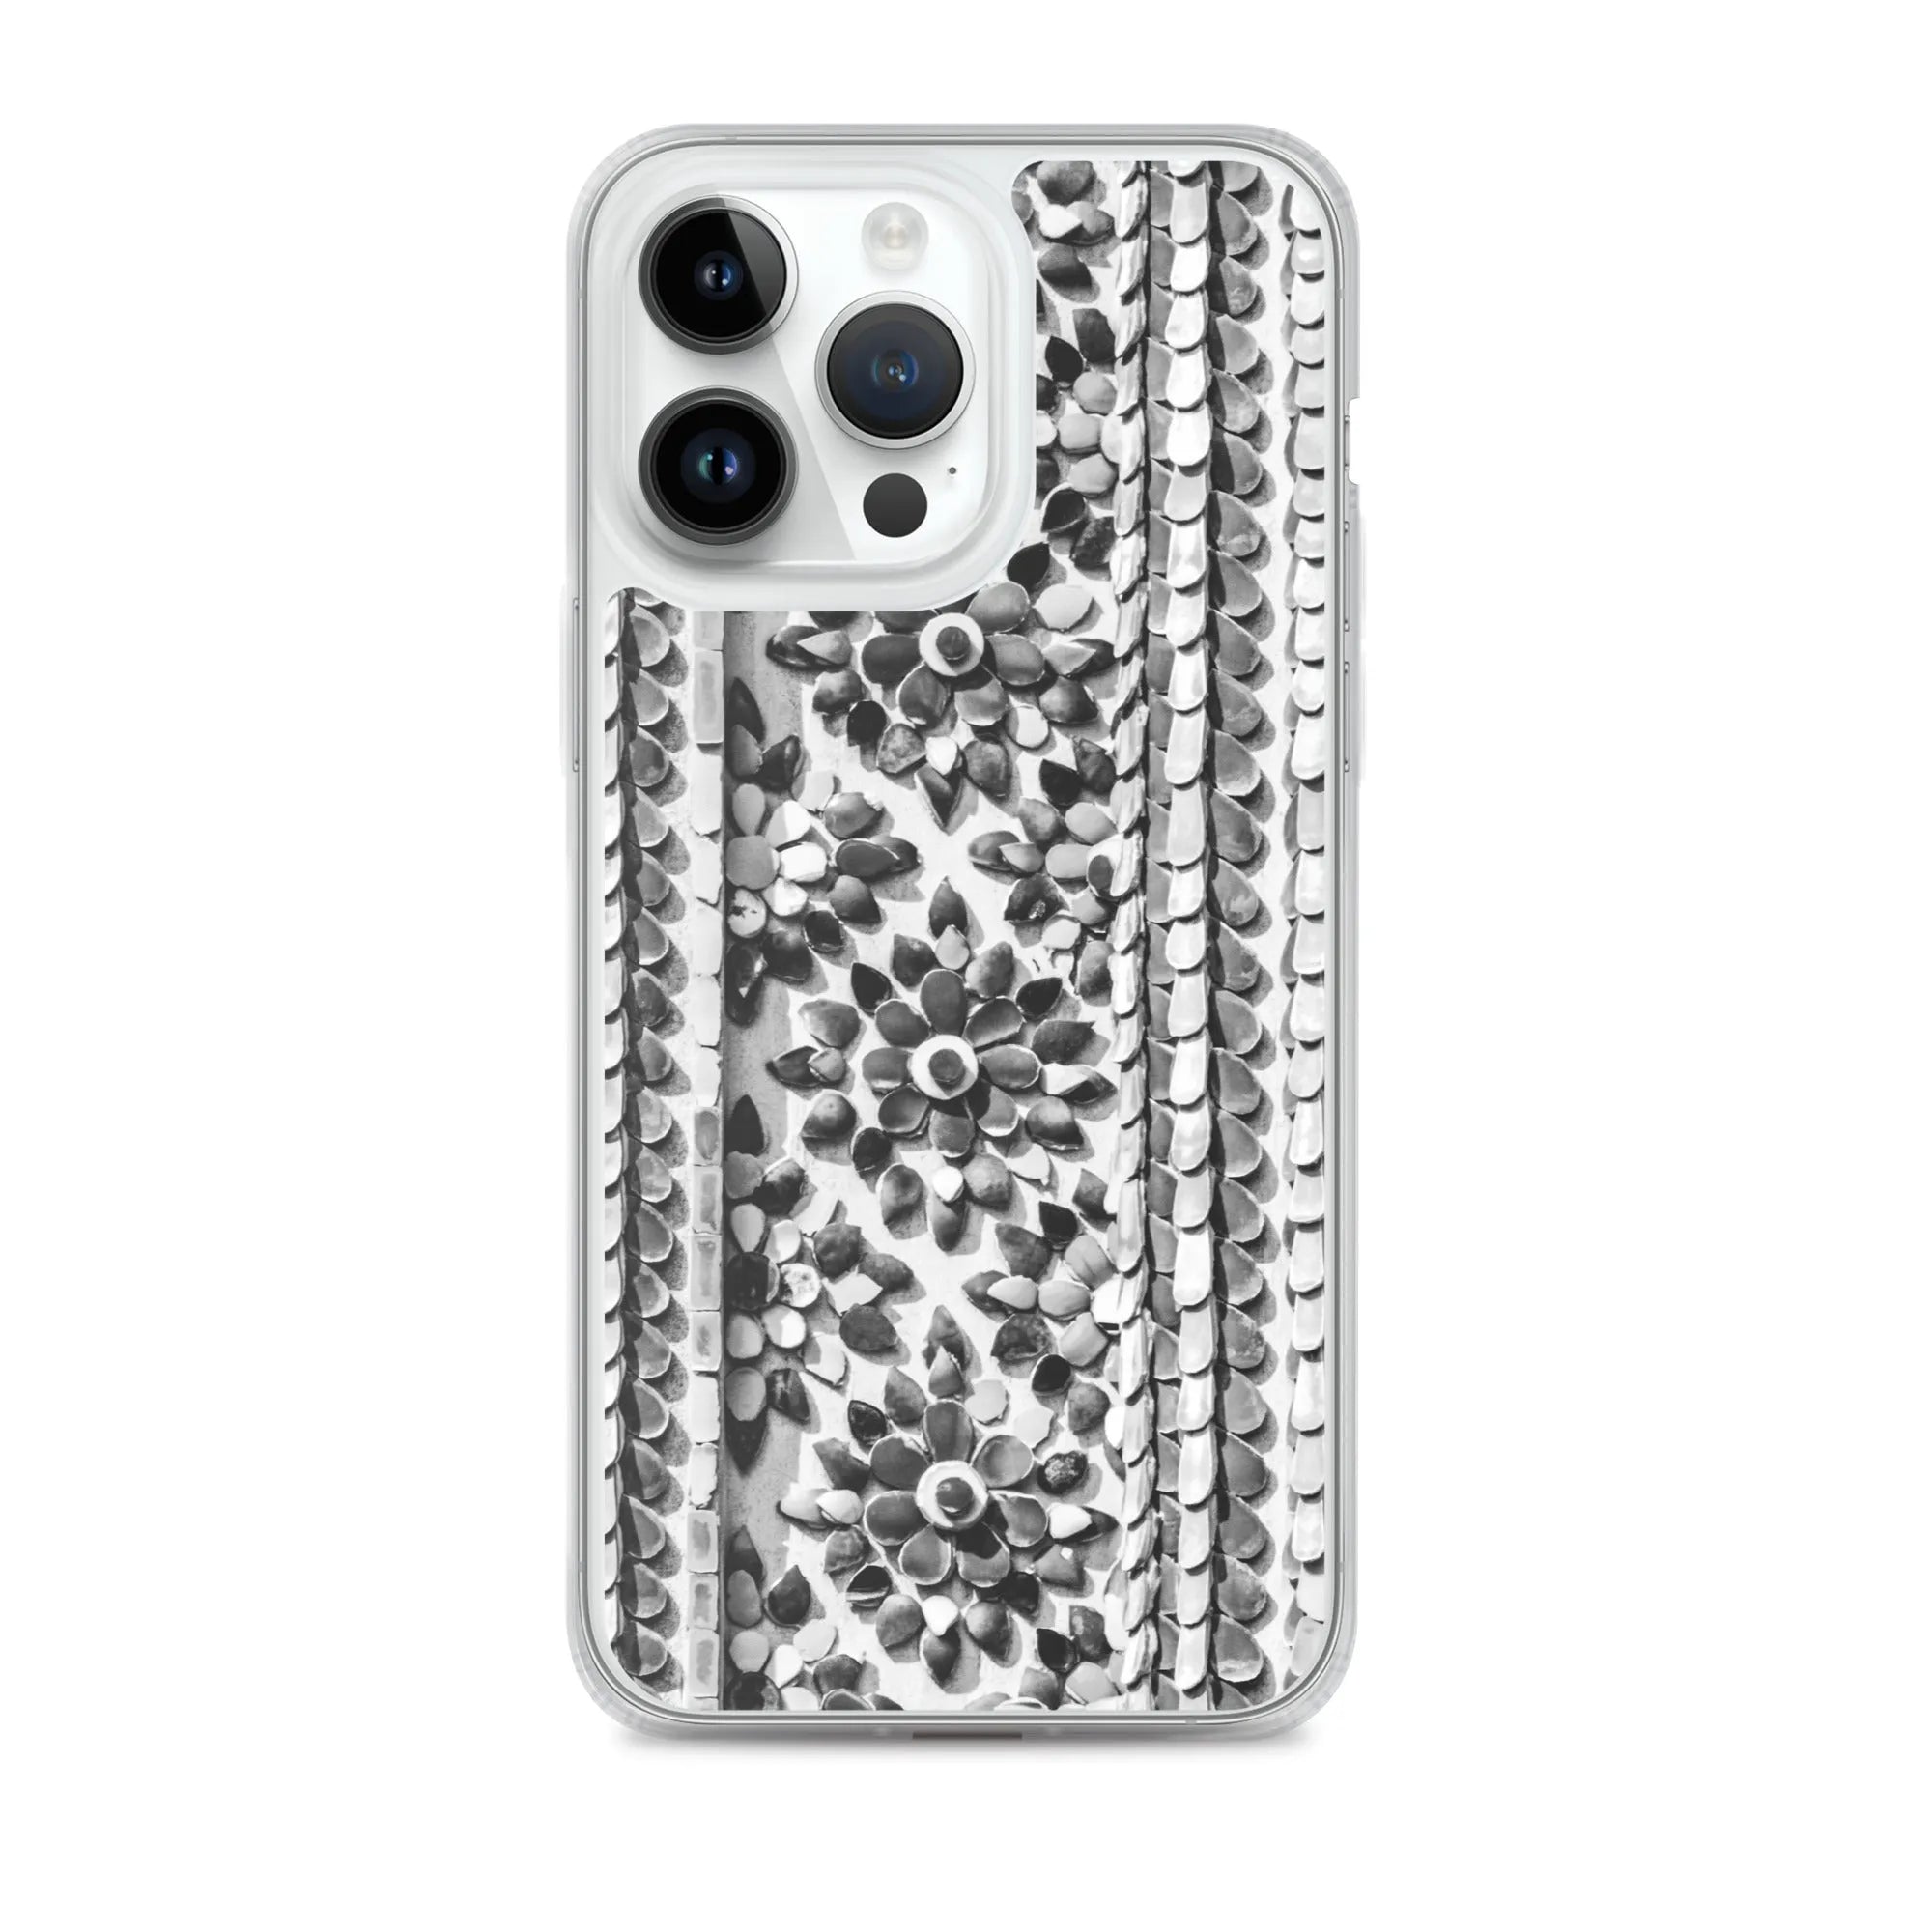 Flower Beds Pattern Iphone Case - Black And White - Iphone 14 Pro Max - Mobile Phone Cases - Aesthetic Art